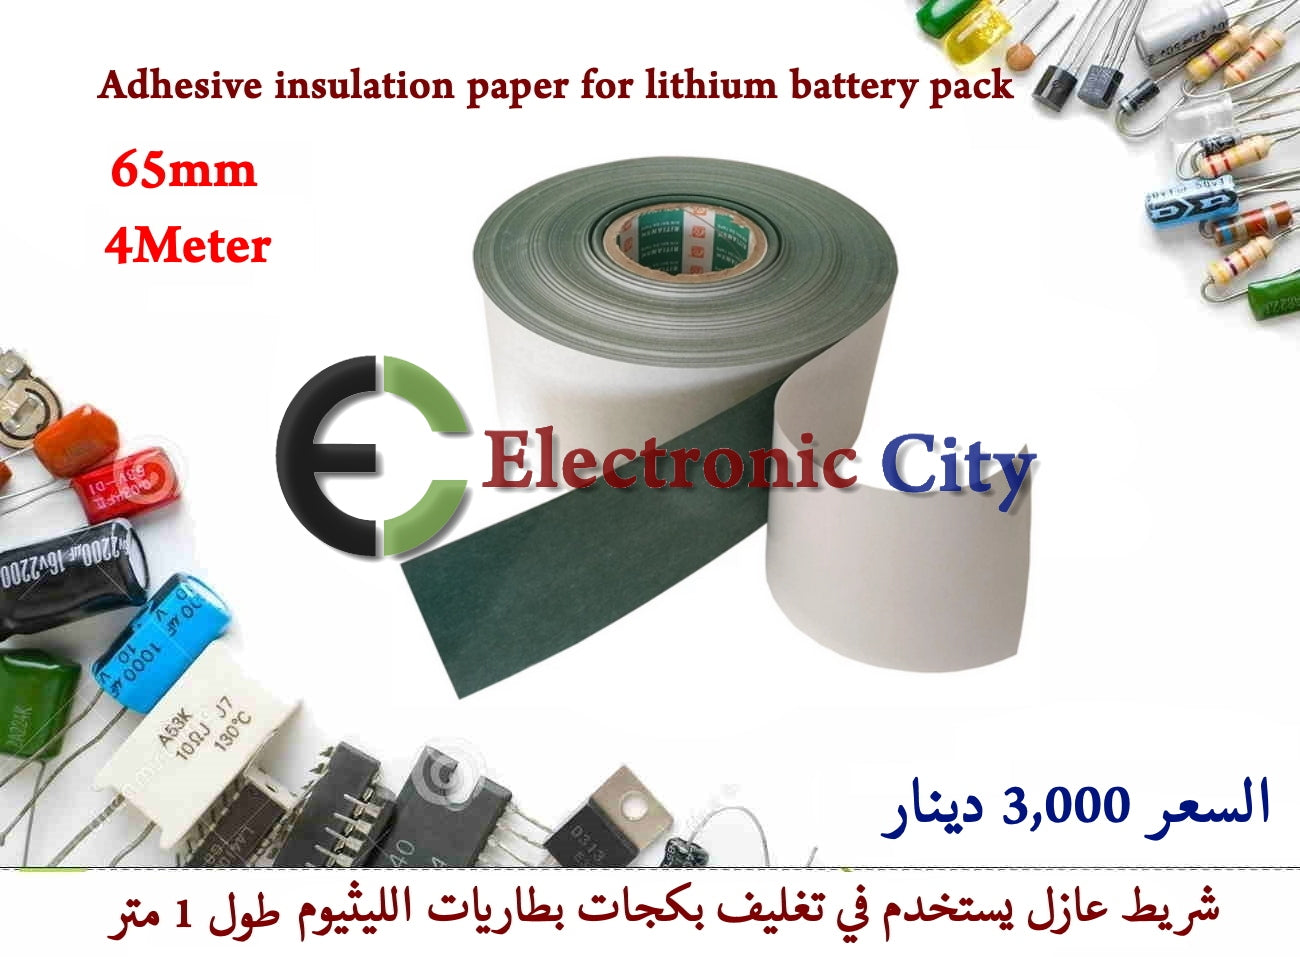 Adhesive insulation paper for lithium battery pack 65mm 4M